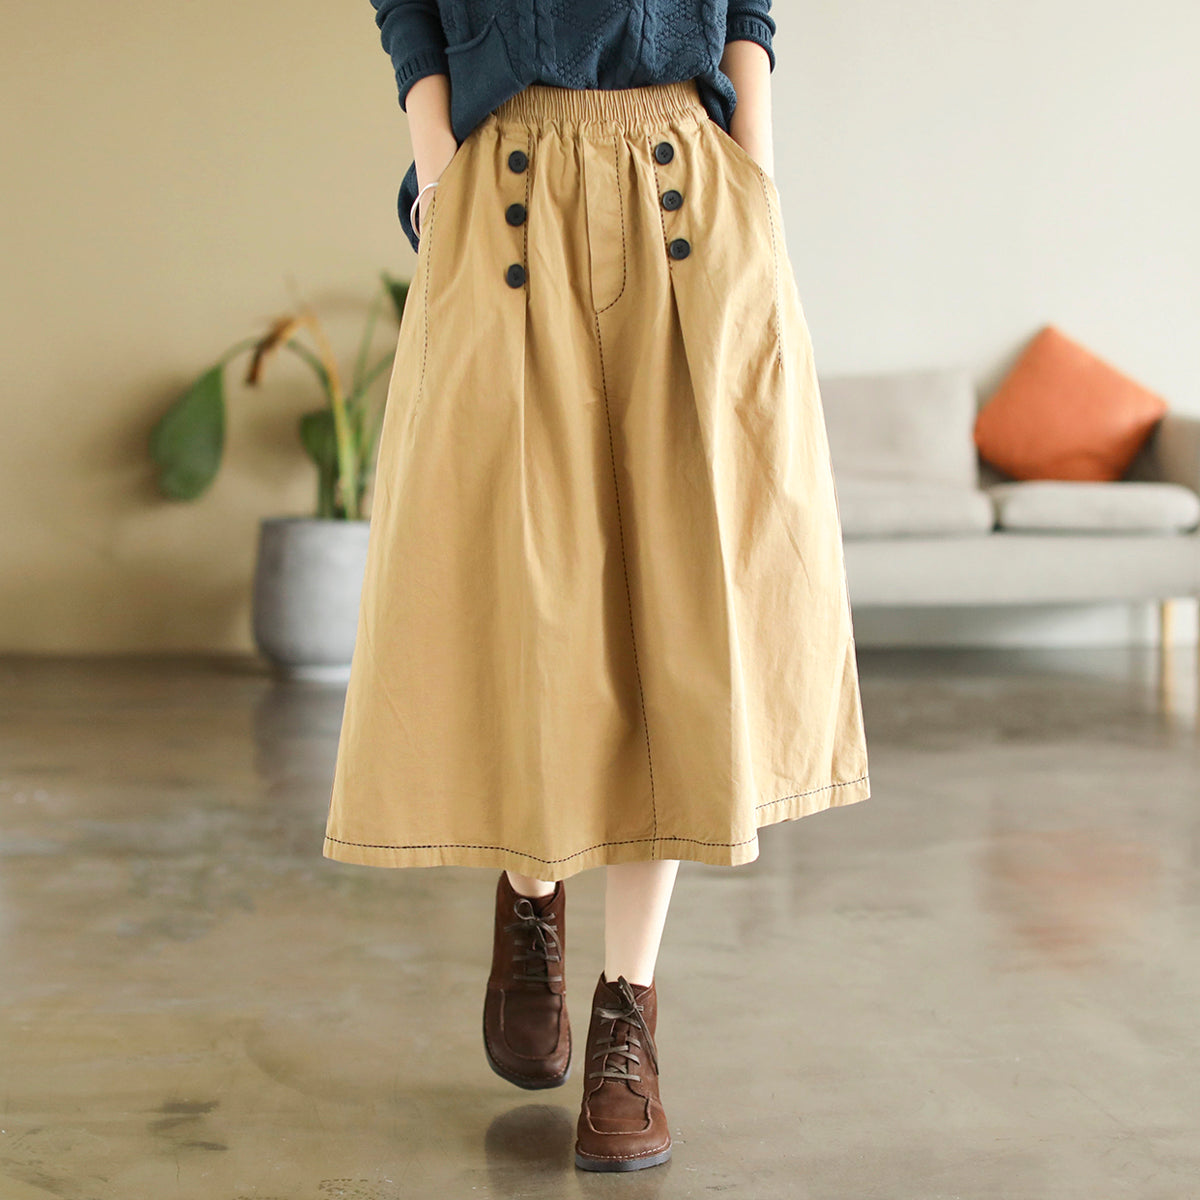 Early Autumn Retro Solid Cotton A-Line Skirt Sep 2022 New Arrival 